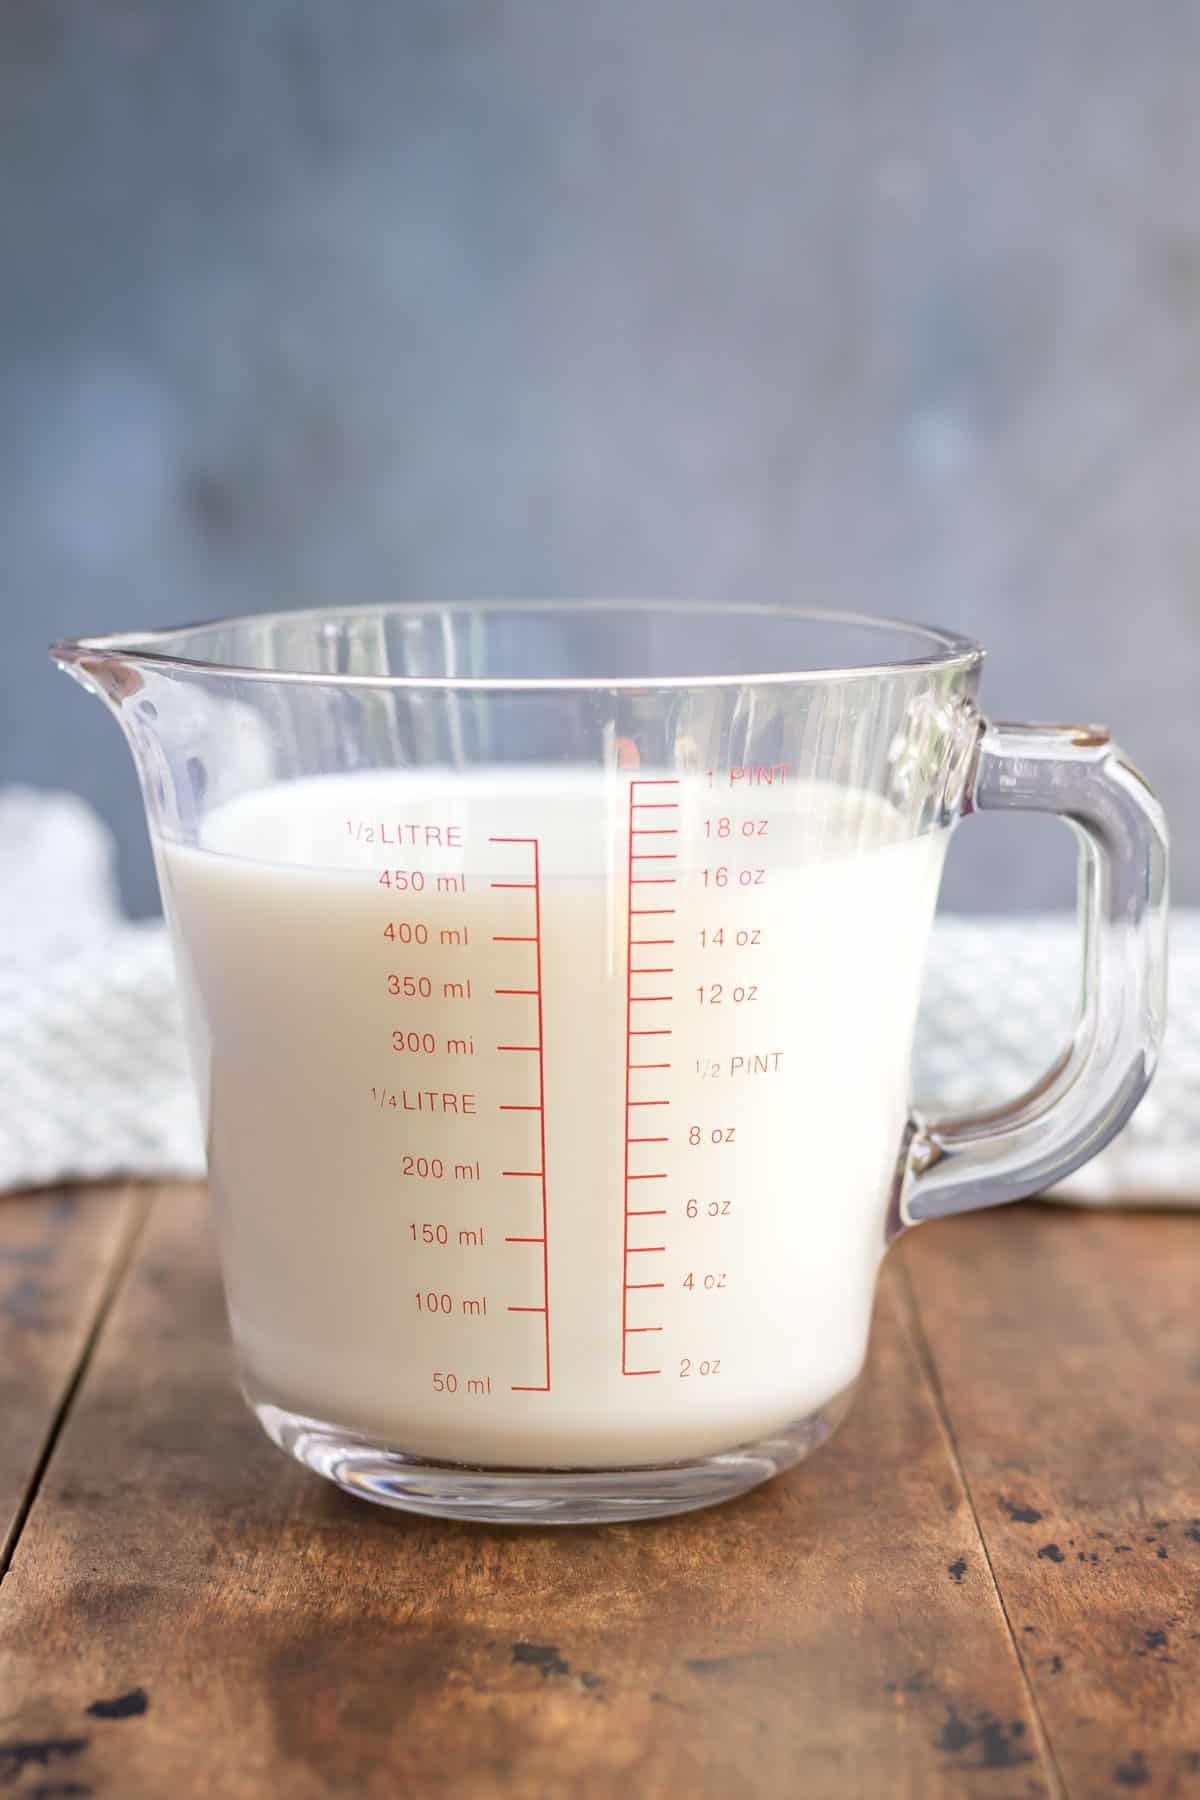 Measuring jug of milk on a wooden table.